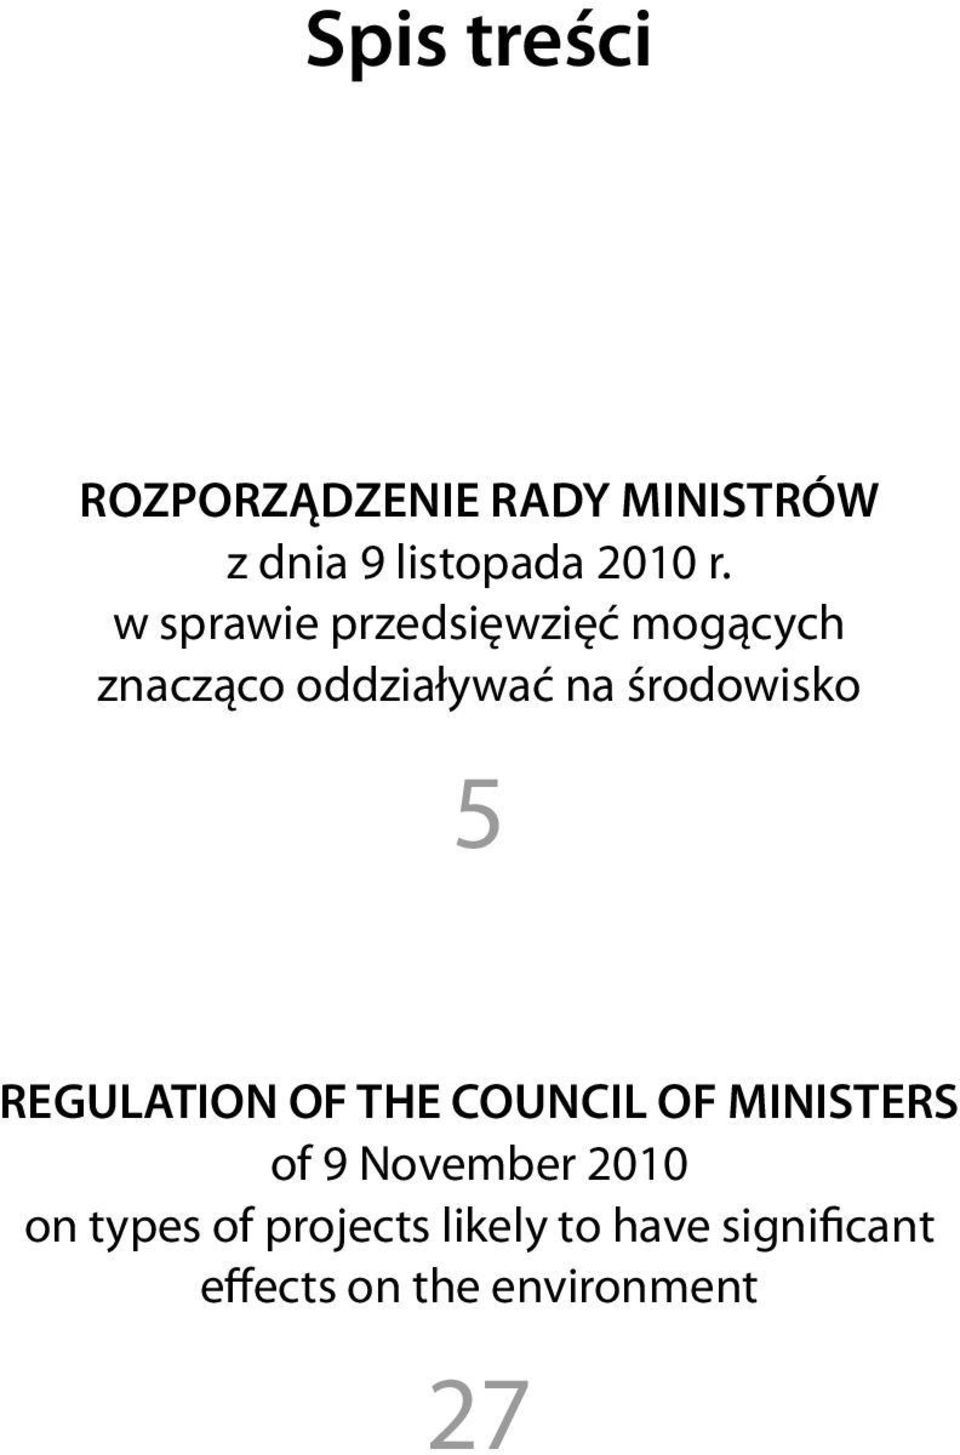 5 REGULATION OF THE COUNCIL OF MINISTERS of 9 November 2010 on types